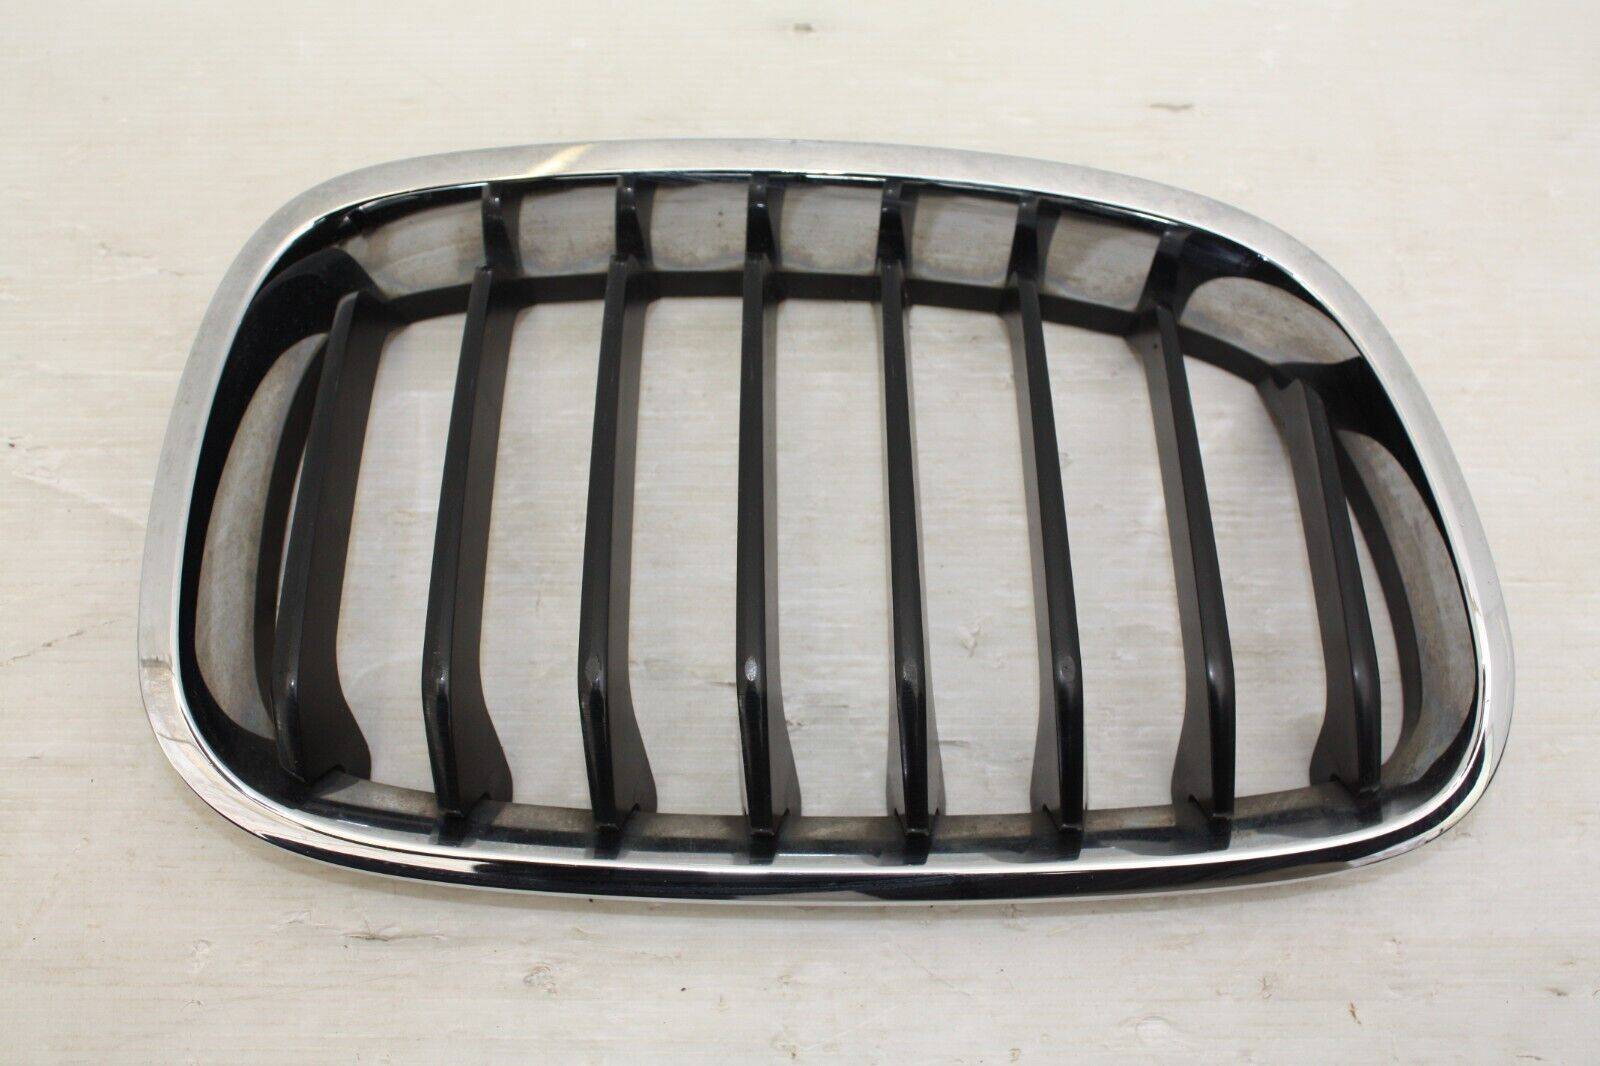 BMW 1 Series F20 Front Bumper Right Kidney Grill 2012 TO 2015 7239022 Genuine 175714674853